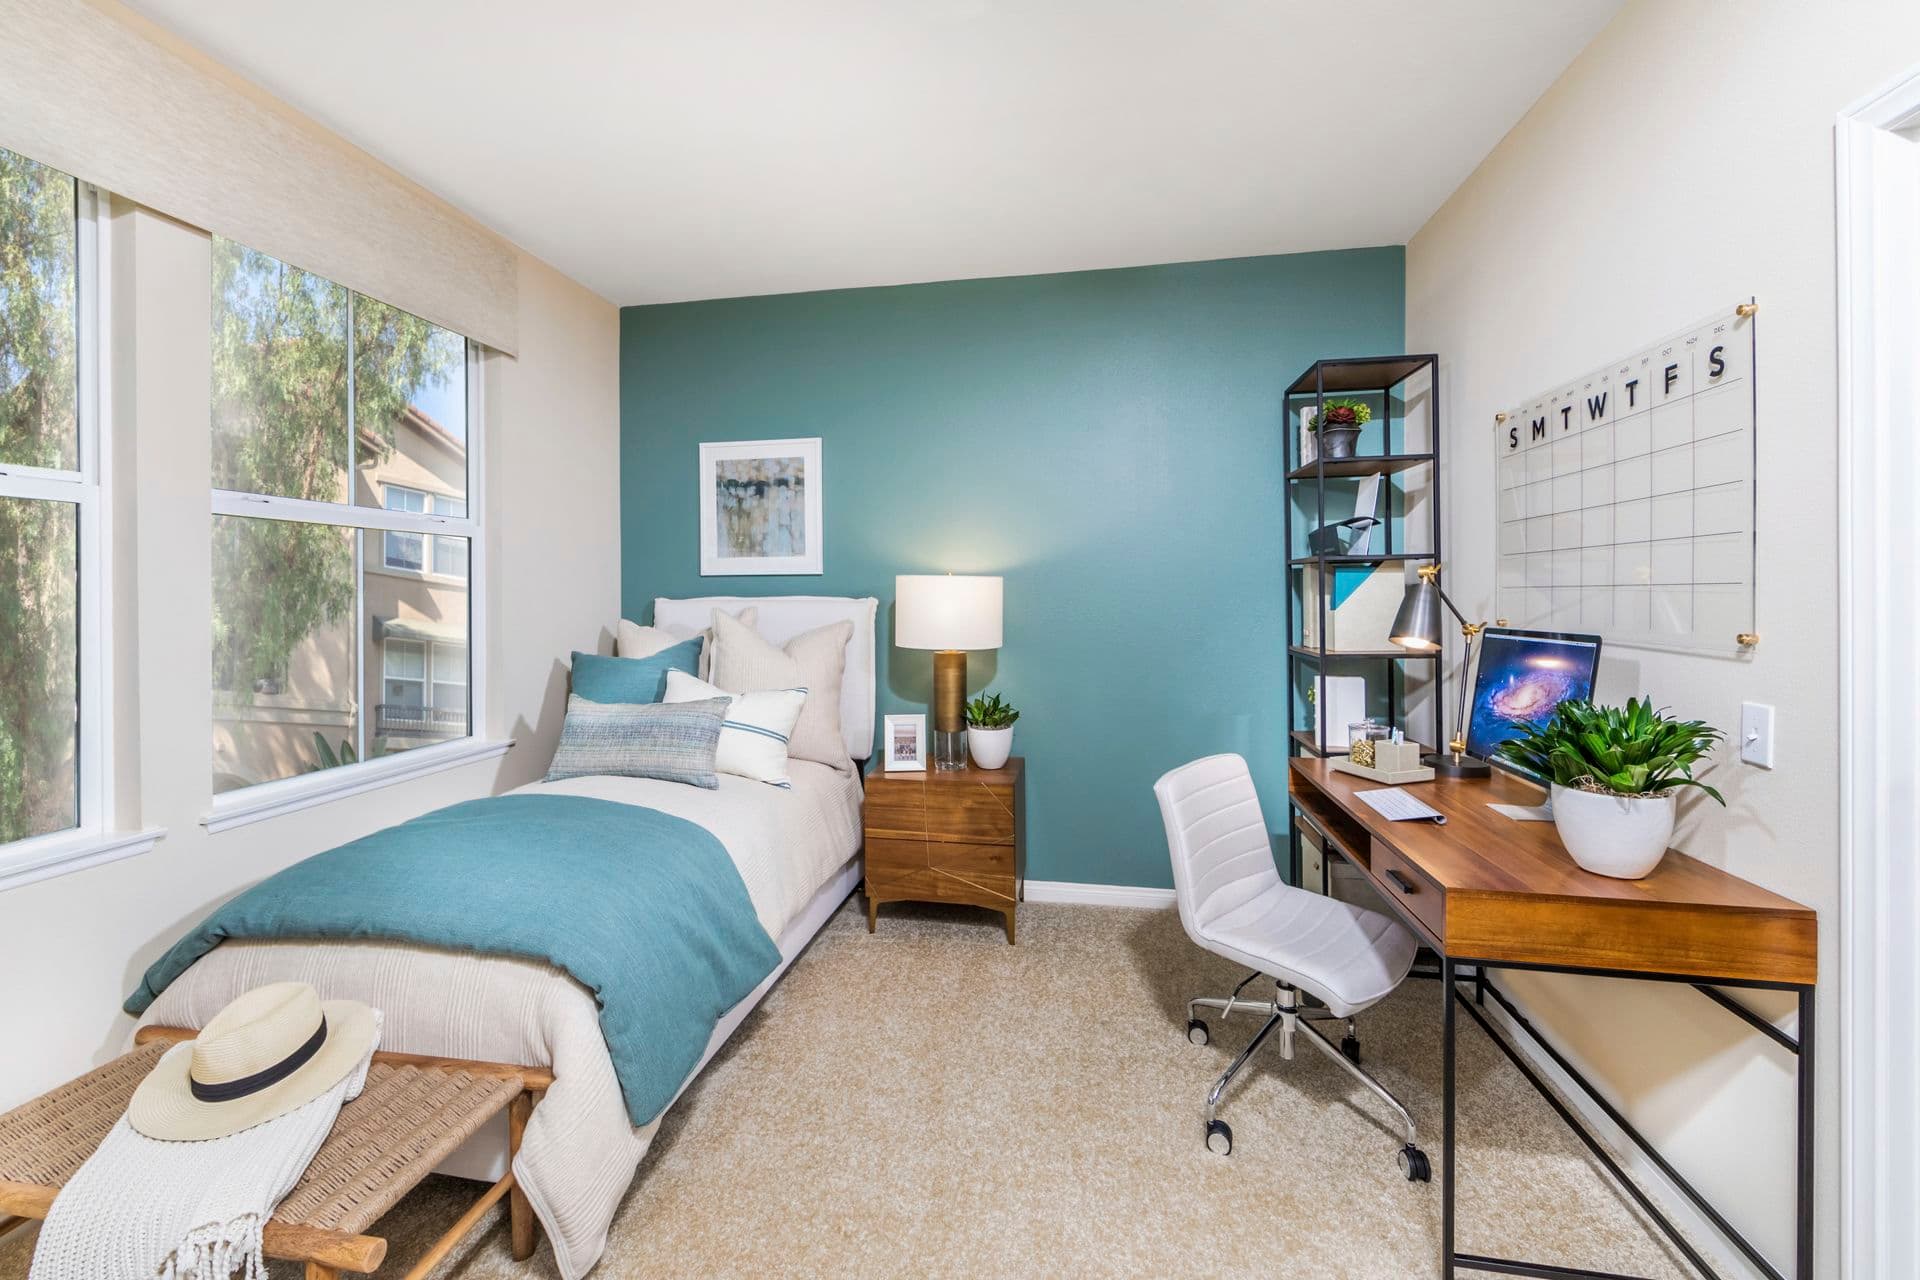 Interior view of bedroom at Quail Hill Apartment Homes in Irvine, CA.